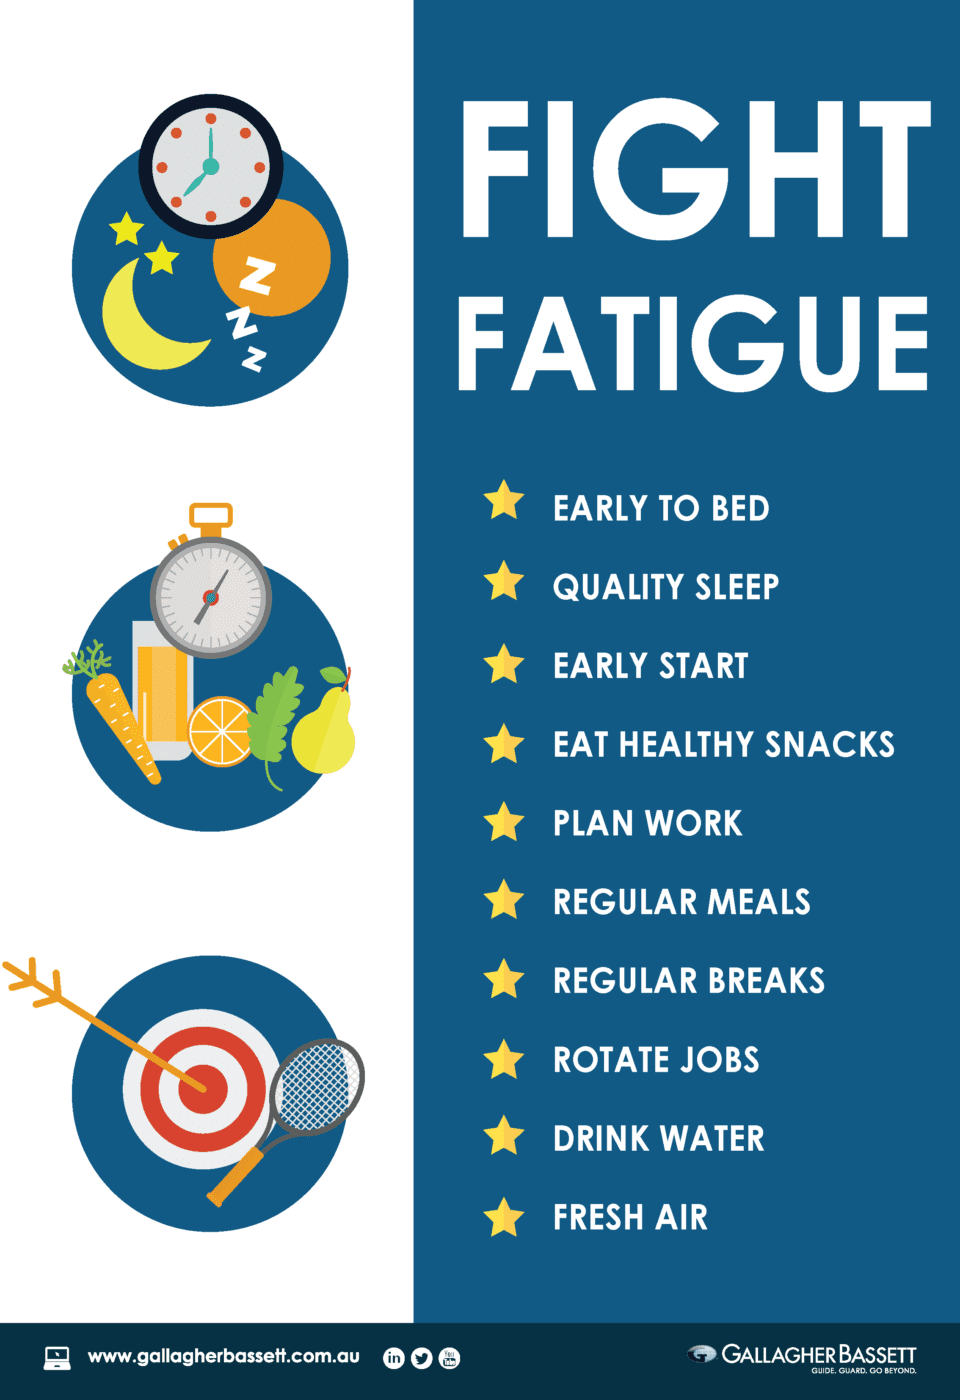 How To Fight Fatigue